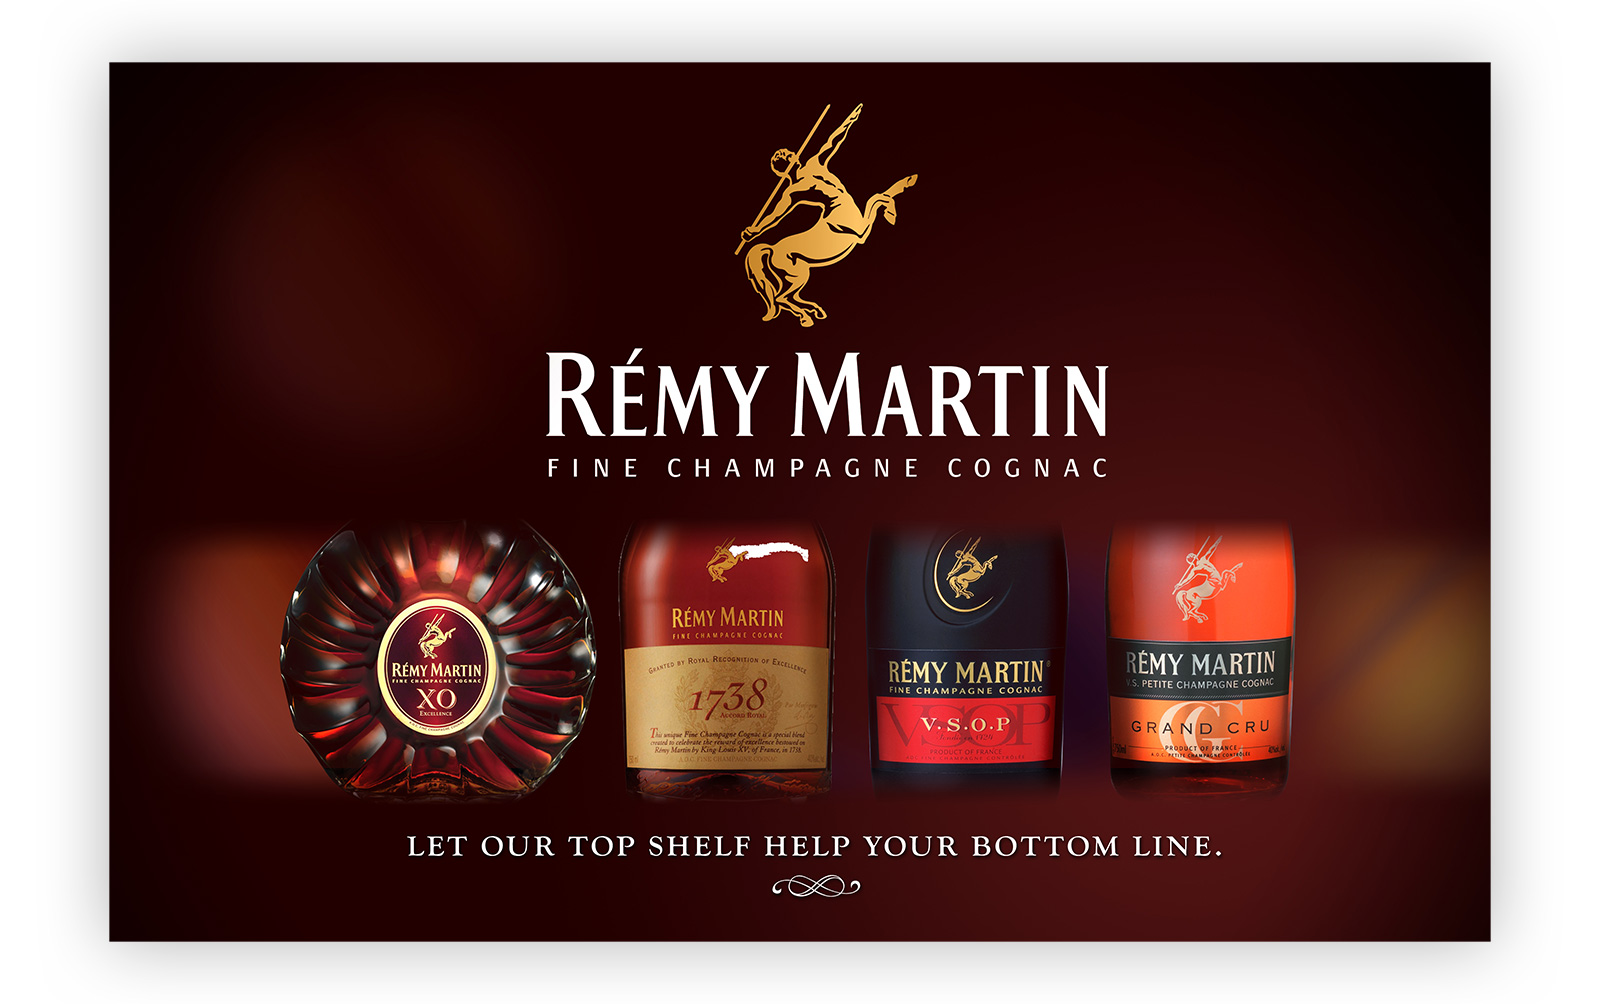 High-quality print and advertising for the spirits industry, depicting: Rémy Martin.